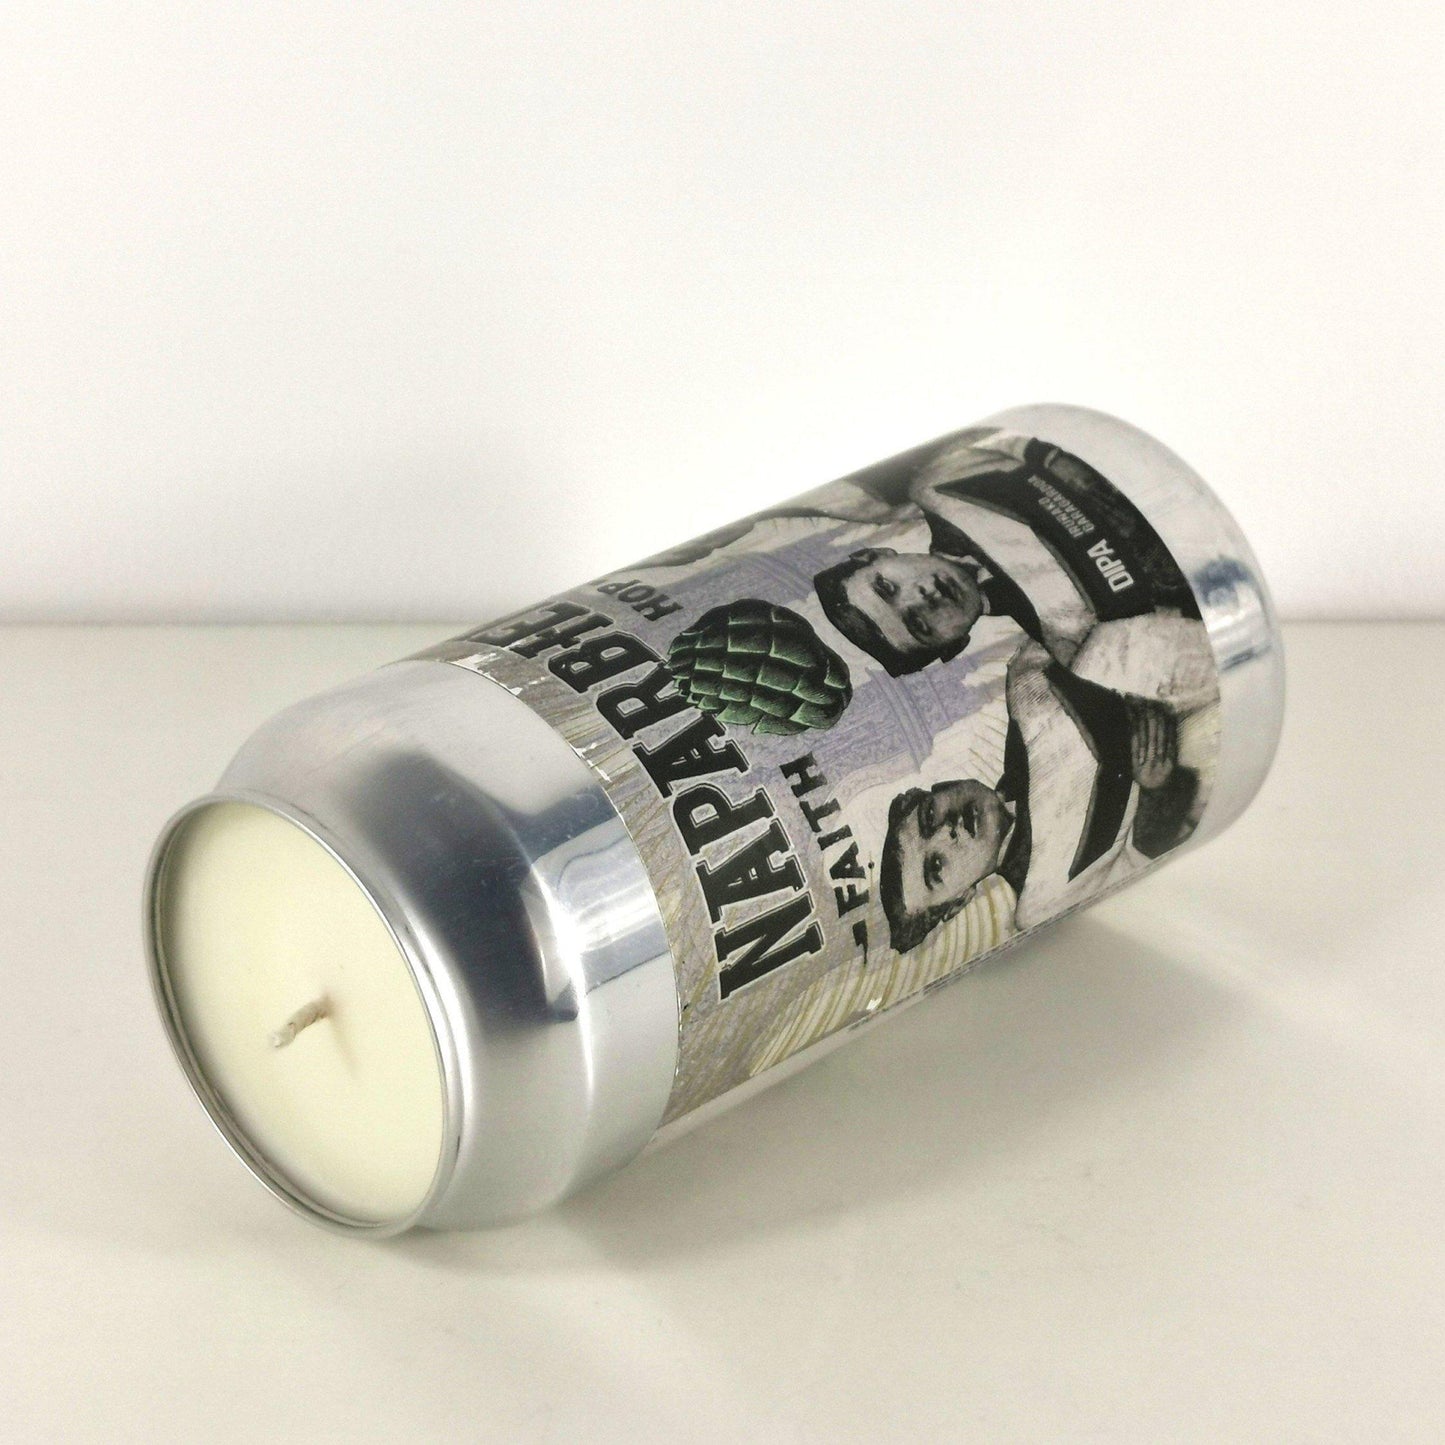 Faith Hop. Naparbier Brewery Craft Beer Can Candle Beer Can Candles Adhock Homeware